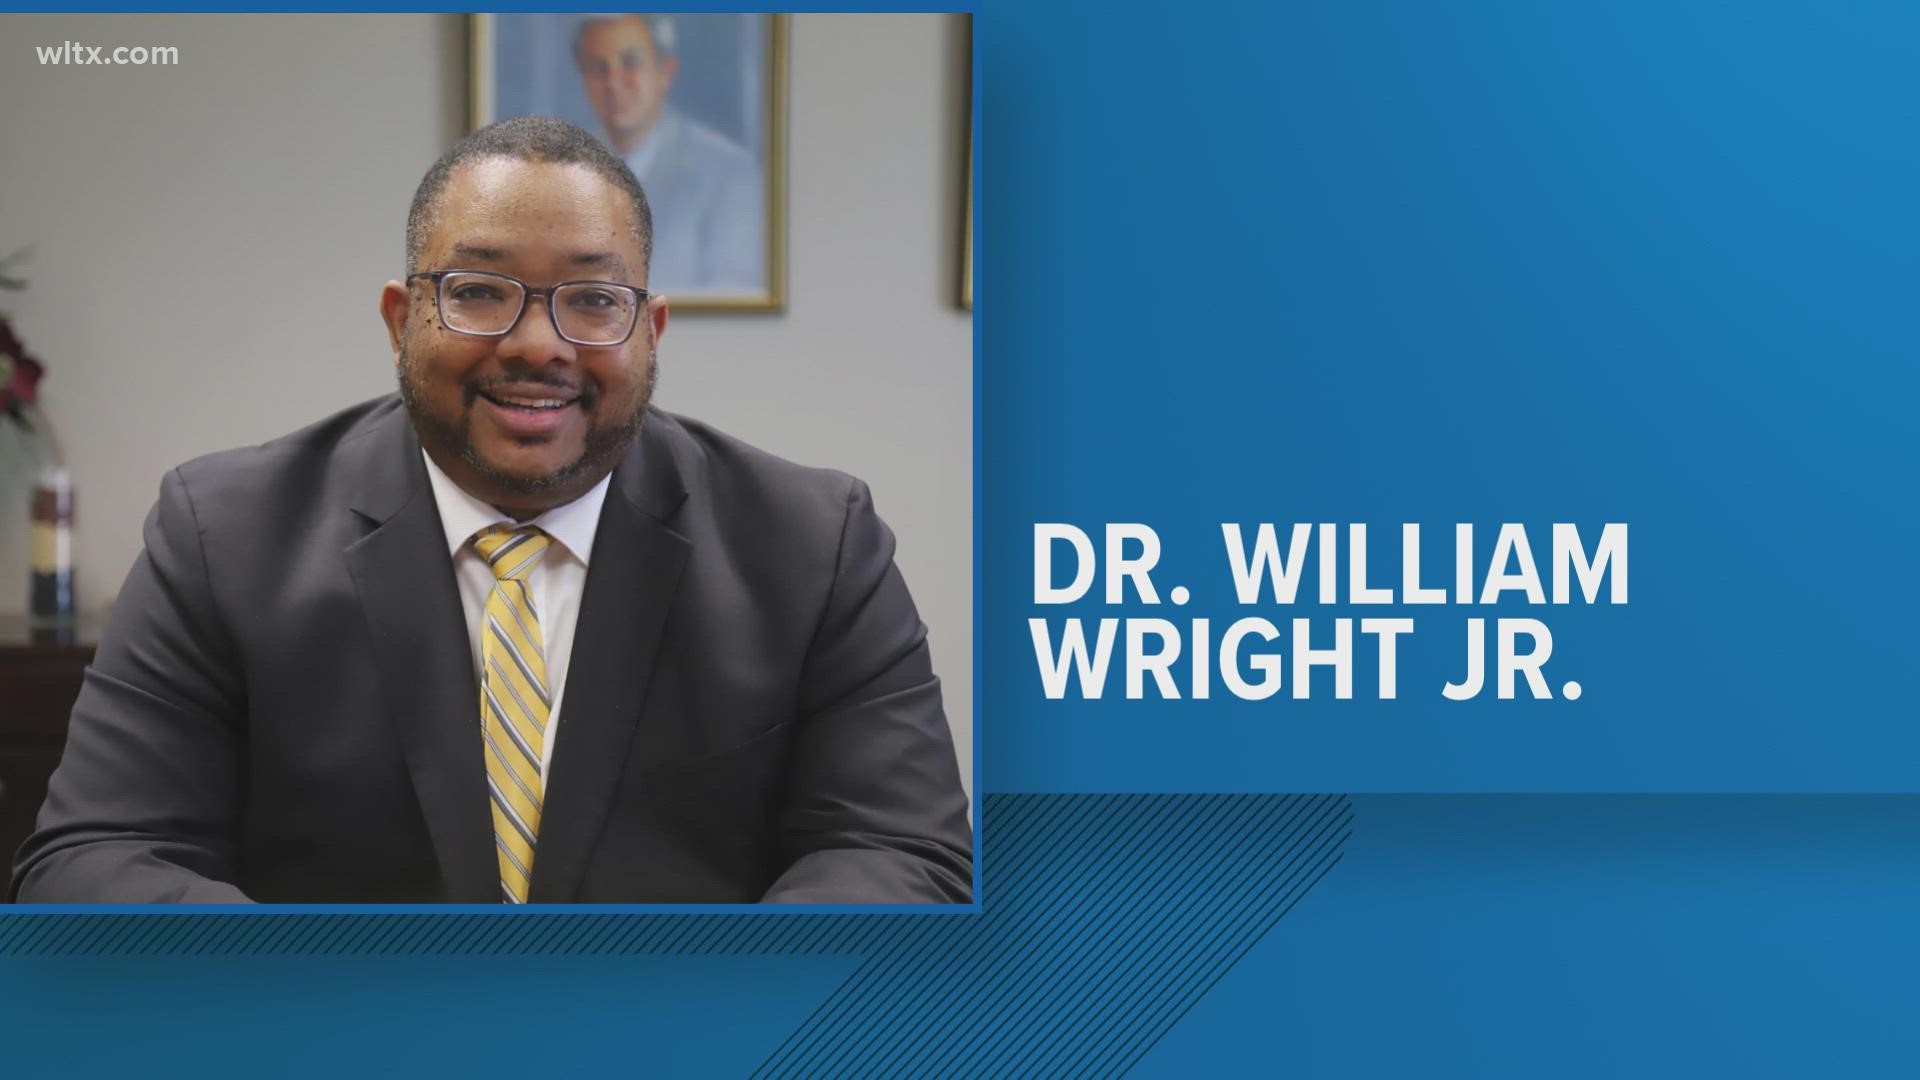 The Sumter School District Board of Trustees voted unanimously to select Dr. William Wright as the school district’s next superintendent in a special called meeting.